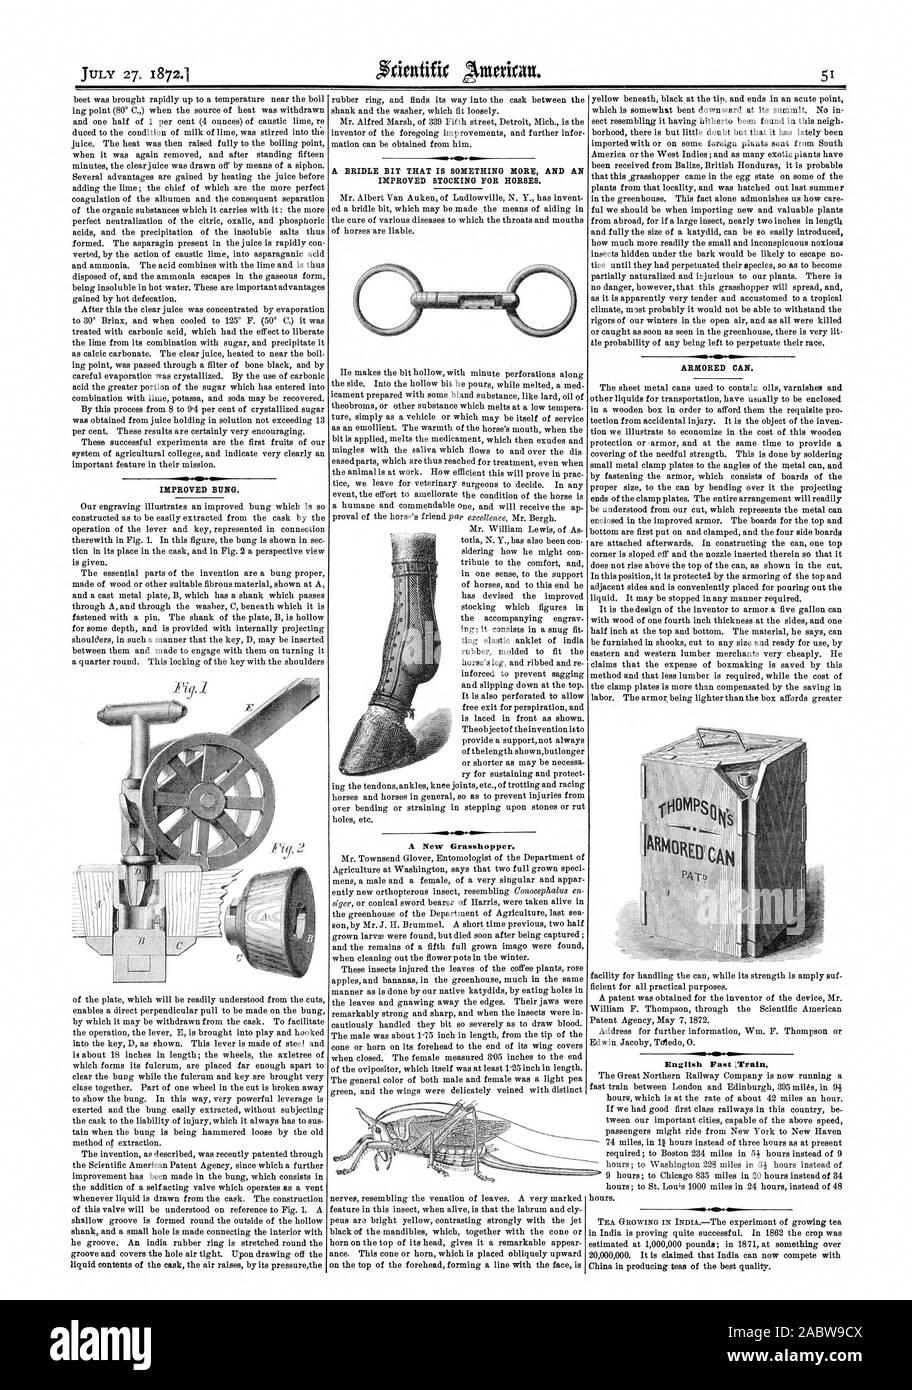 IMPROVED BUNG. A BRIDLE BIT THAT IS SOMETHING MORE AND AN IMPROVED STOCKING FOR HORSES. HAIIMIN4 A New Grasshopper. ARMORED CAN., scientific american, 1872-07-27 Stock Photo